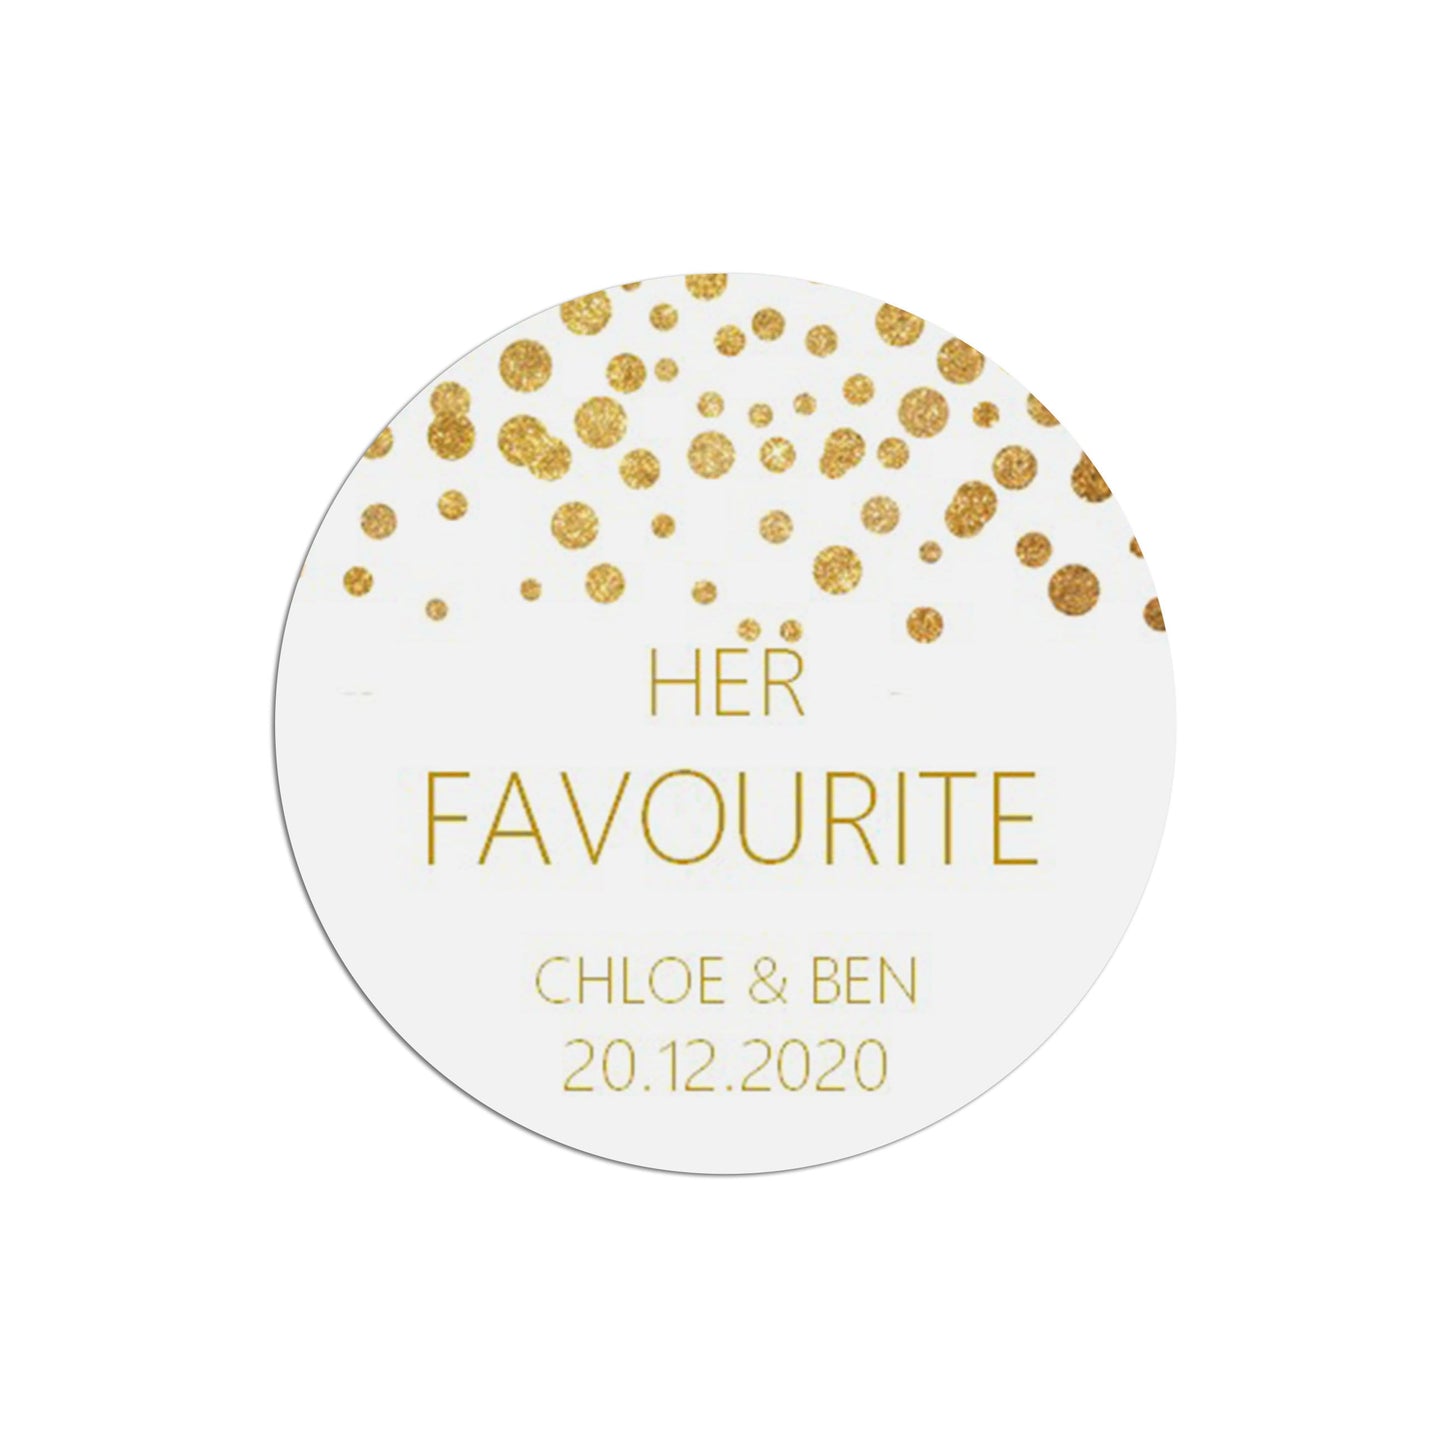 Her Favourite Wedding Stickers, Gold Effect 37mm Round Personalised x 35 Stickers Per Sheet